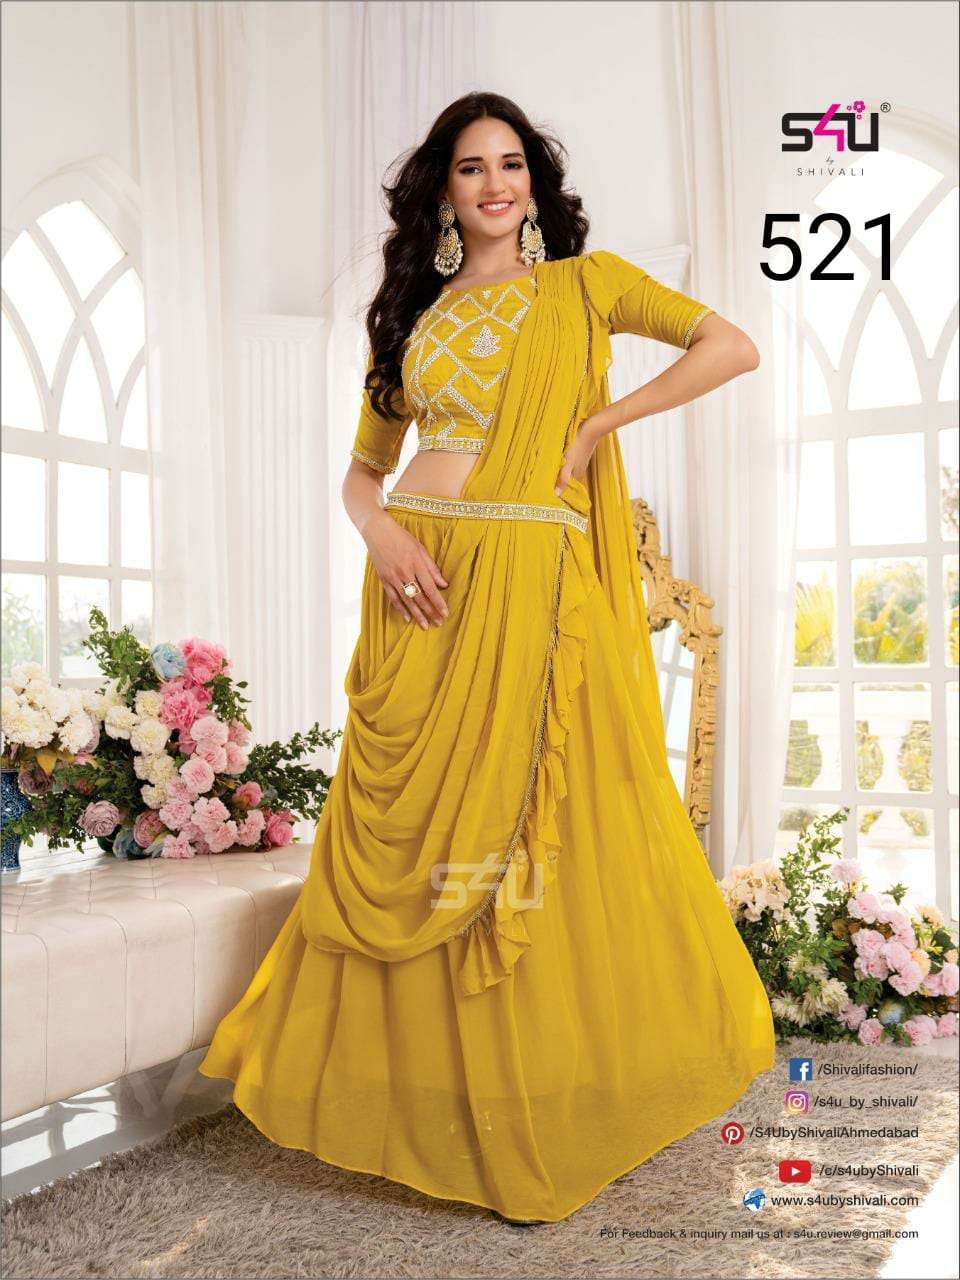 s4u 521 designer look long party wear collection wholesale price 